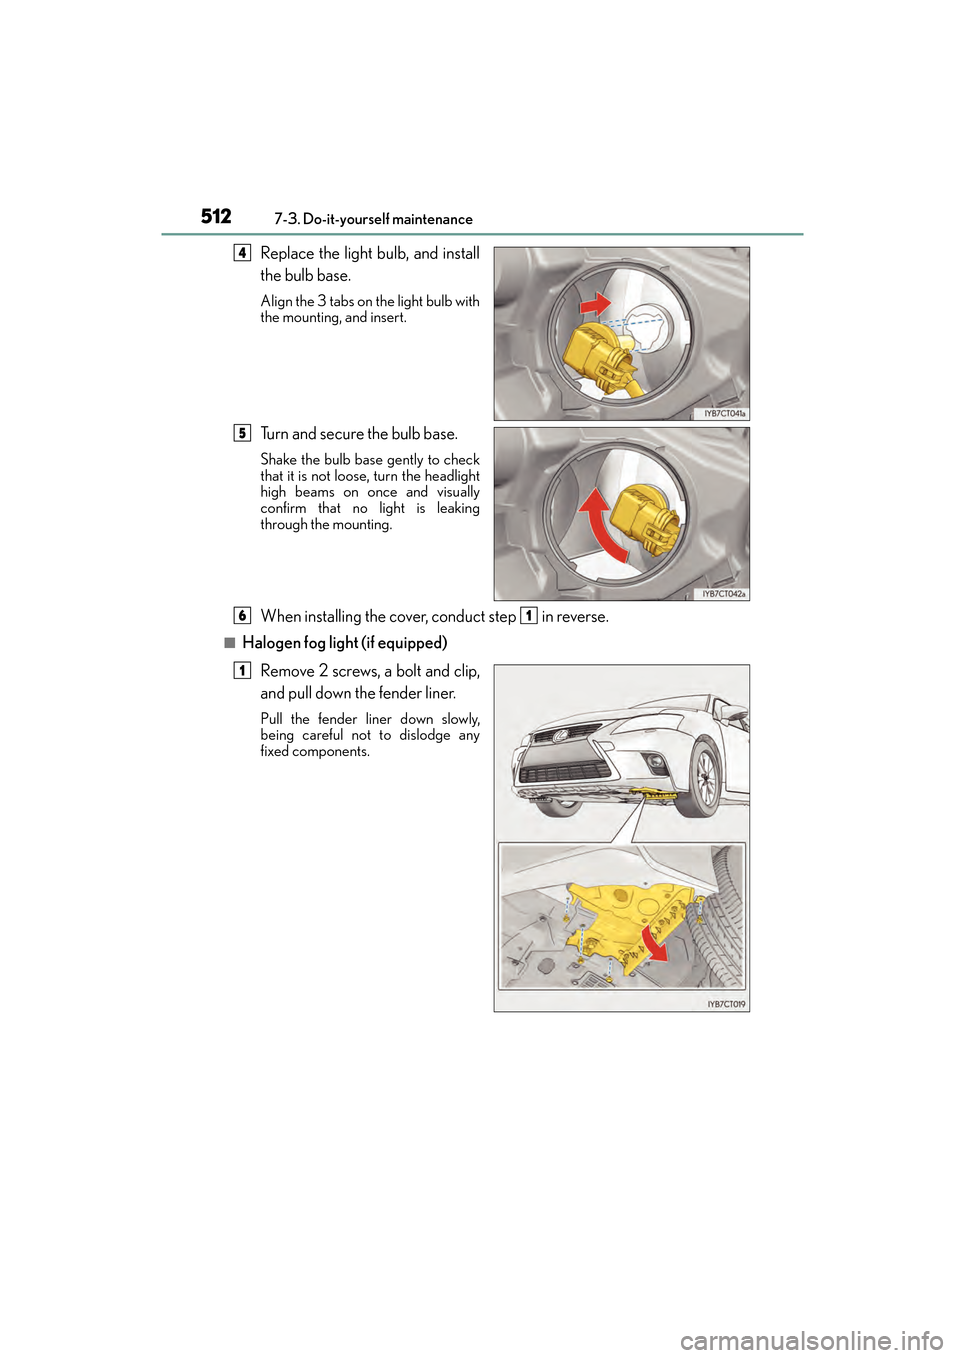 Lexus CT200h 2015  Owners Manual (in English) 512
CT200h_OM_OM76174U_(U)7-3. Do-it-yourself maintenance
Replace the light bulb, and install
the bulb base.
Align the 3 tabs on the light bulb with
the mounting, and insert.
Turn and secure the bulb 